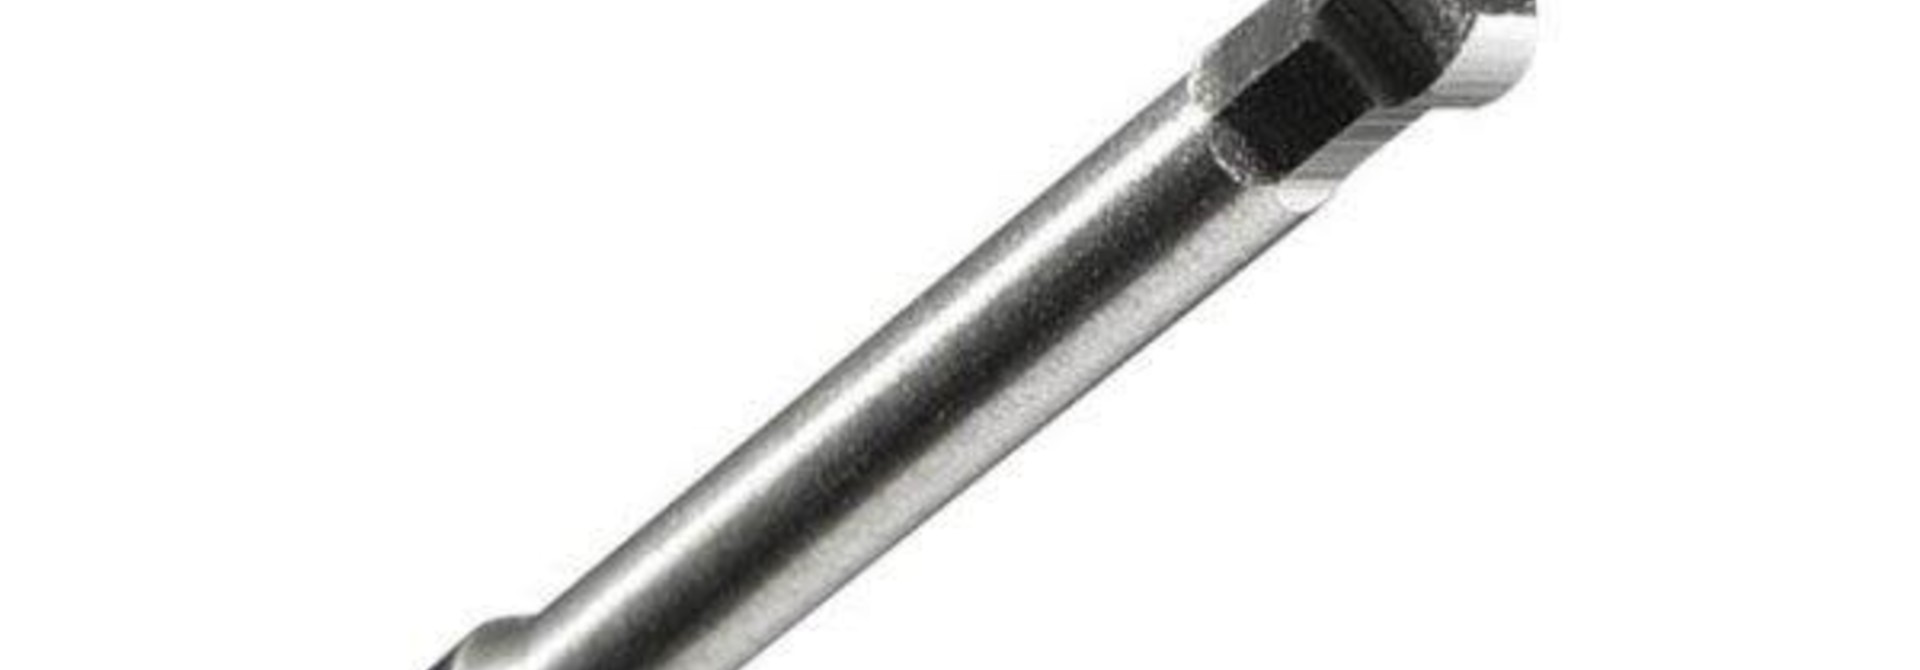 Replacement Tip Ball .093 X 120 mm (3:32). H139341